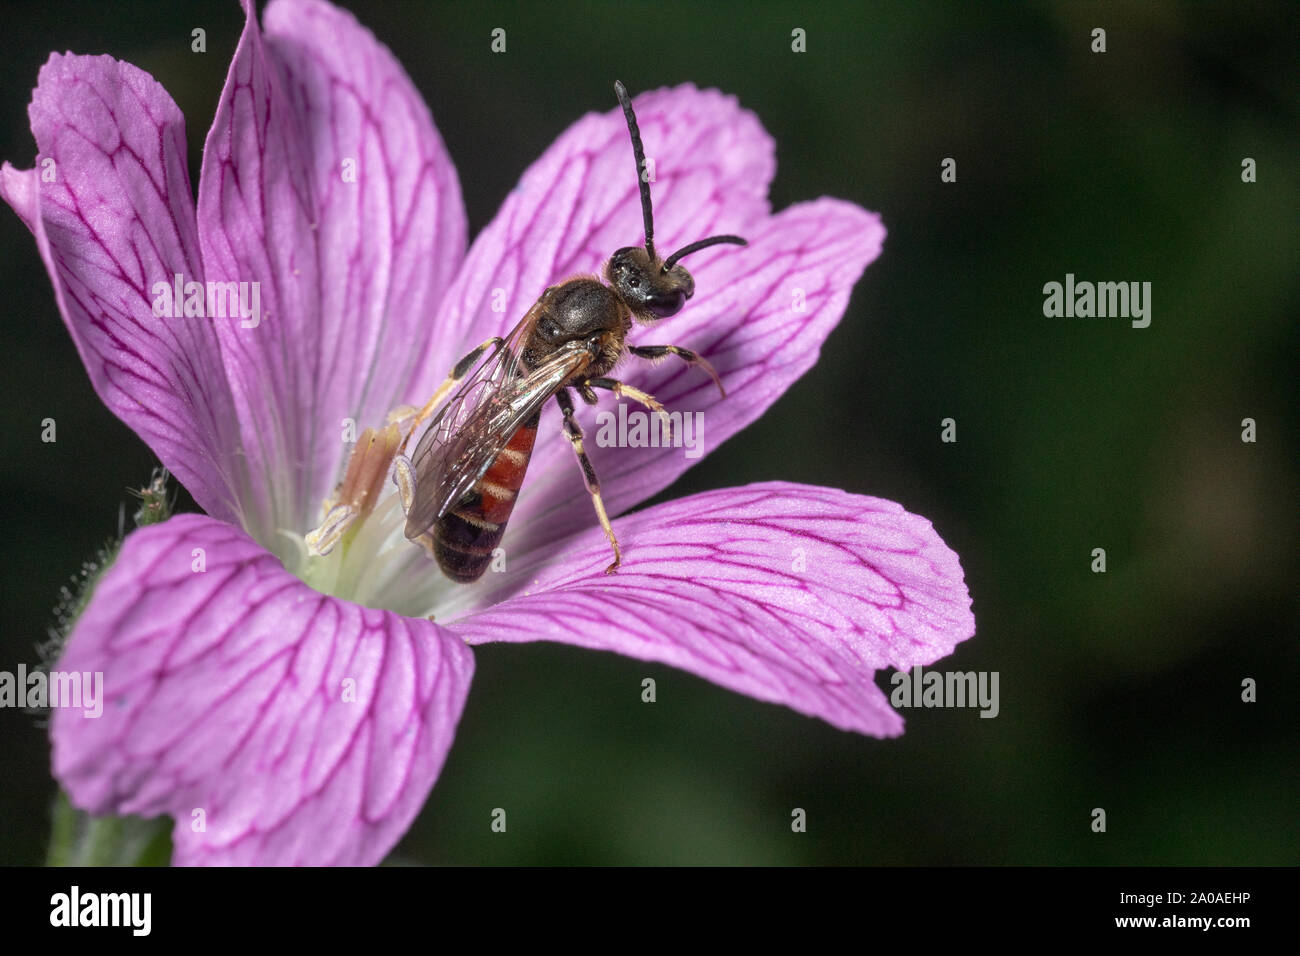 Male common furrow bee on a gentian flower, Kent, England, UK. Stock Photo